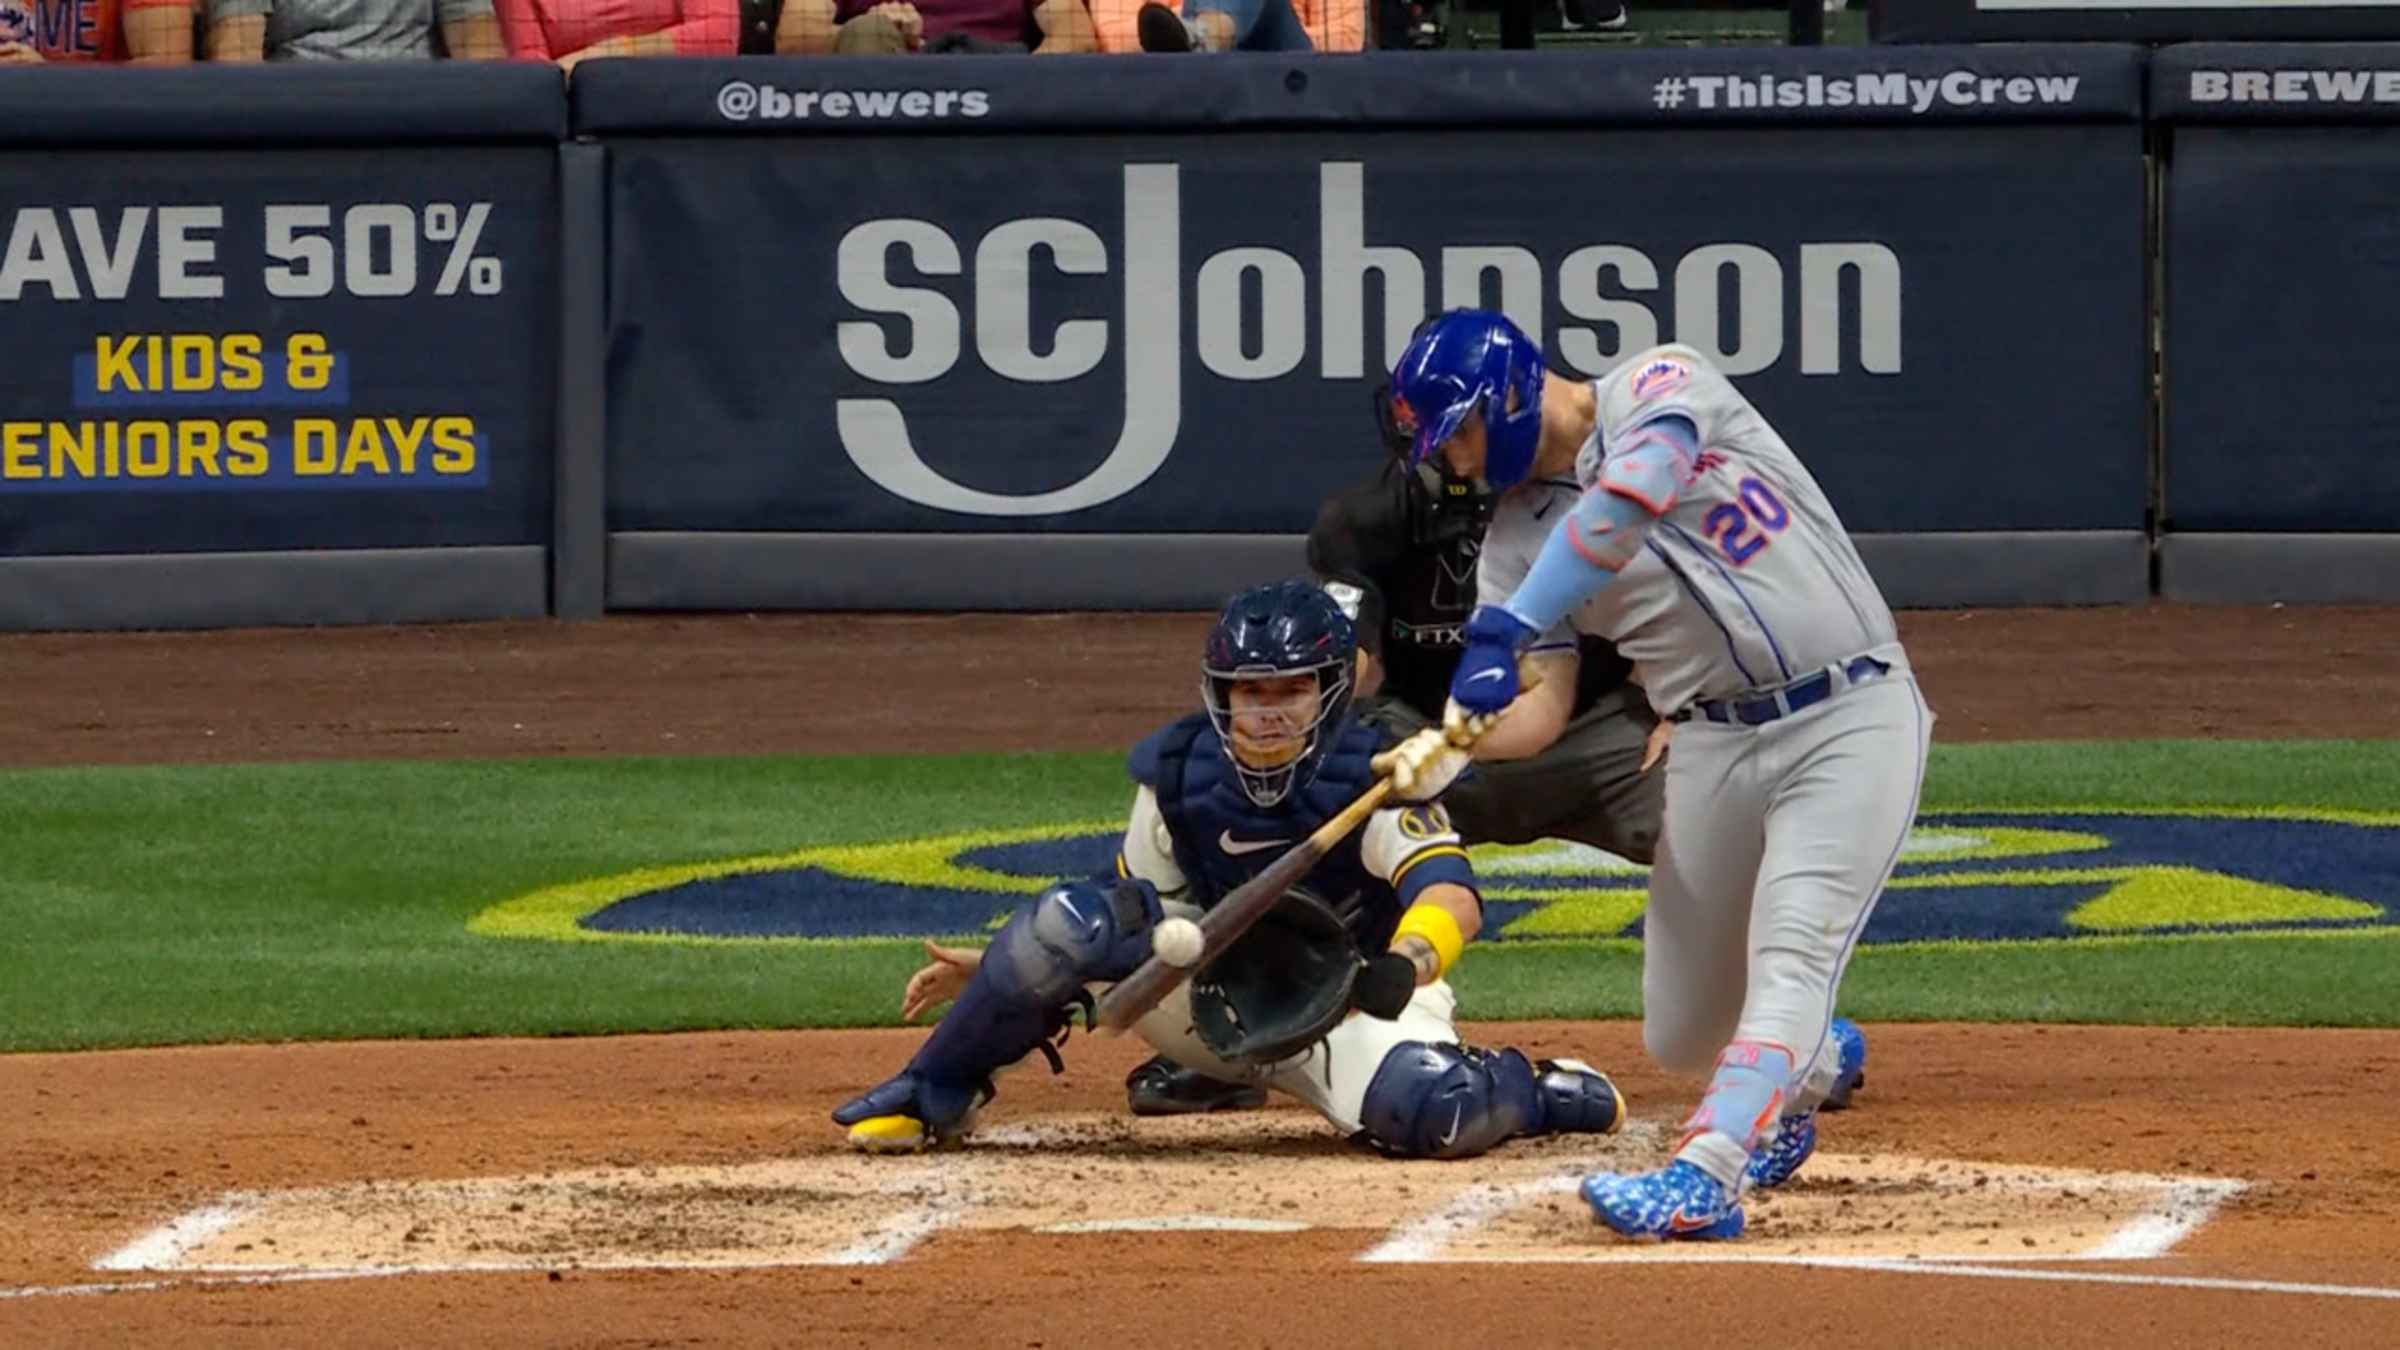 MLB Scores: Brewers 2, Mets 1—Mets go down quietly, struggles